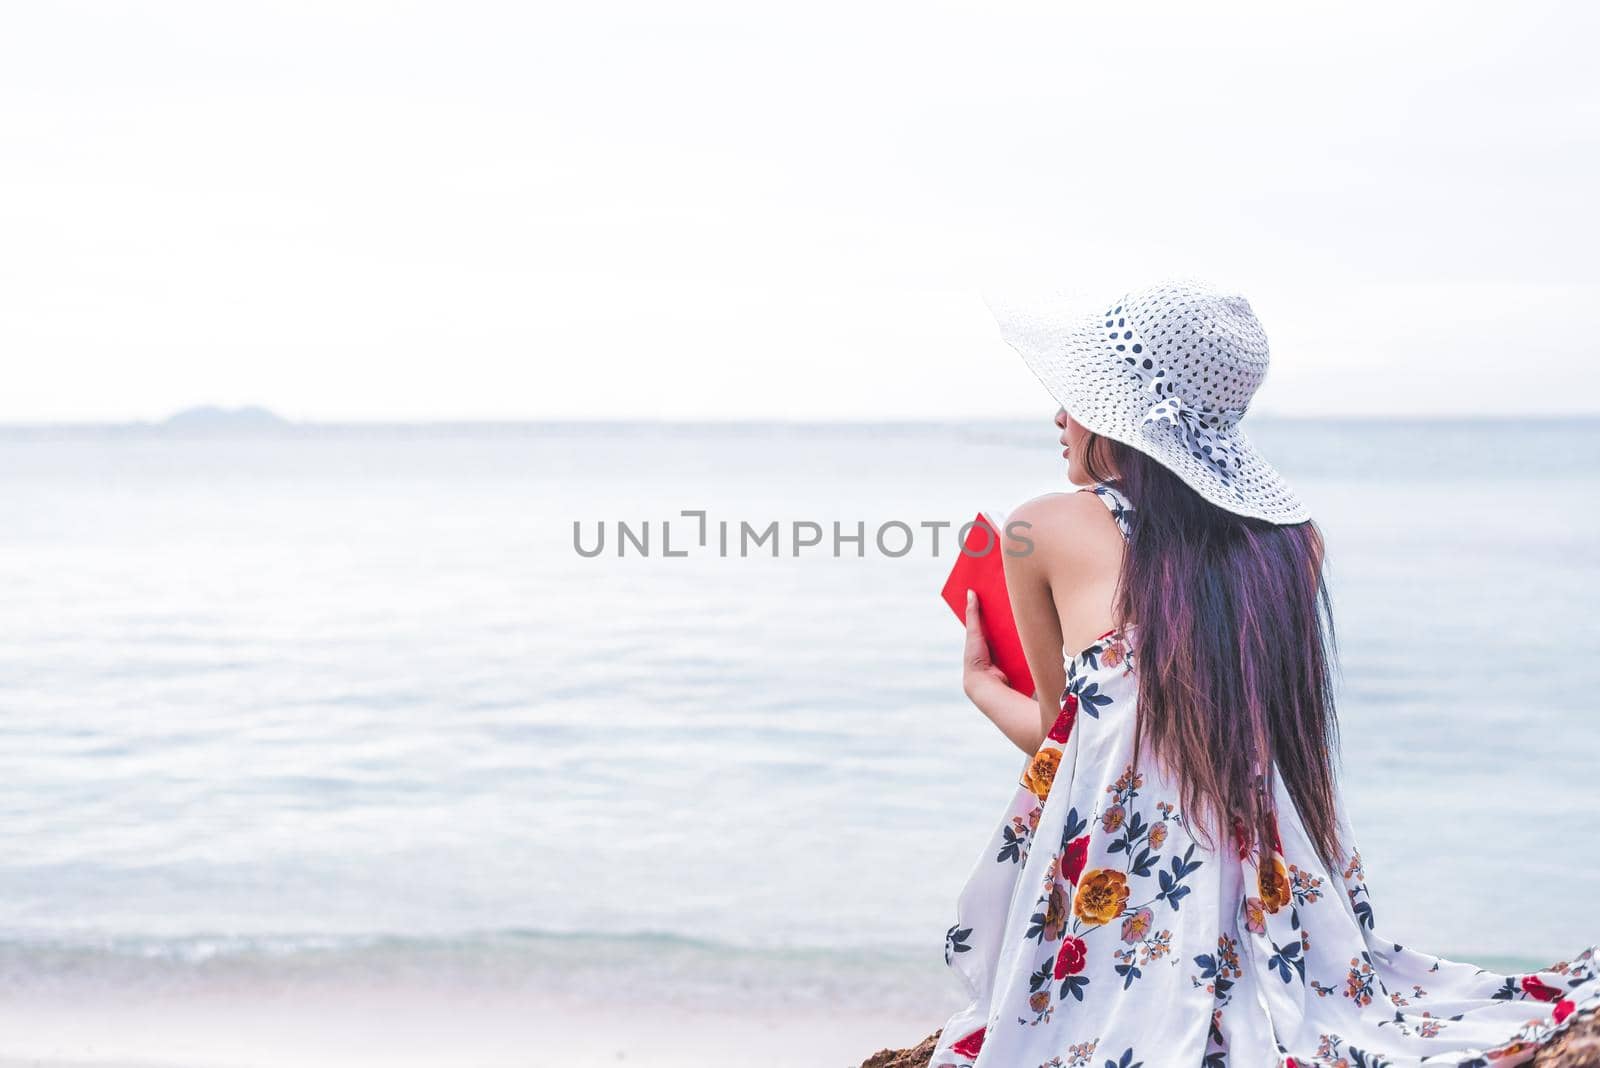 Asian woman waiting for love or someone make her happy. Lonely and Beauty concept. Back view scene of girl. Ocean and sea theme. Copy space in left side. Woman day and soulmate theme.